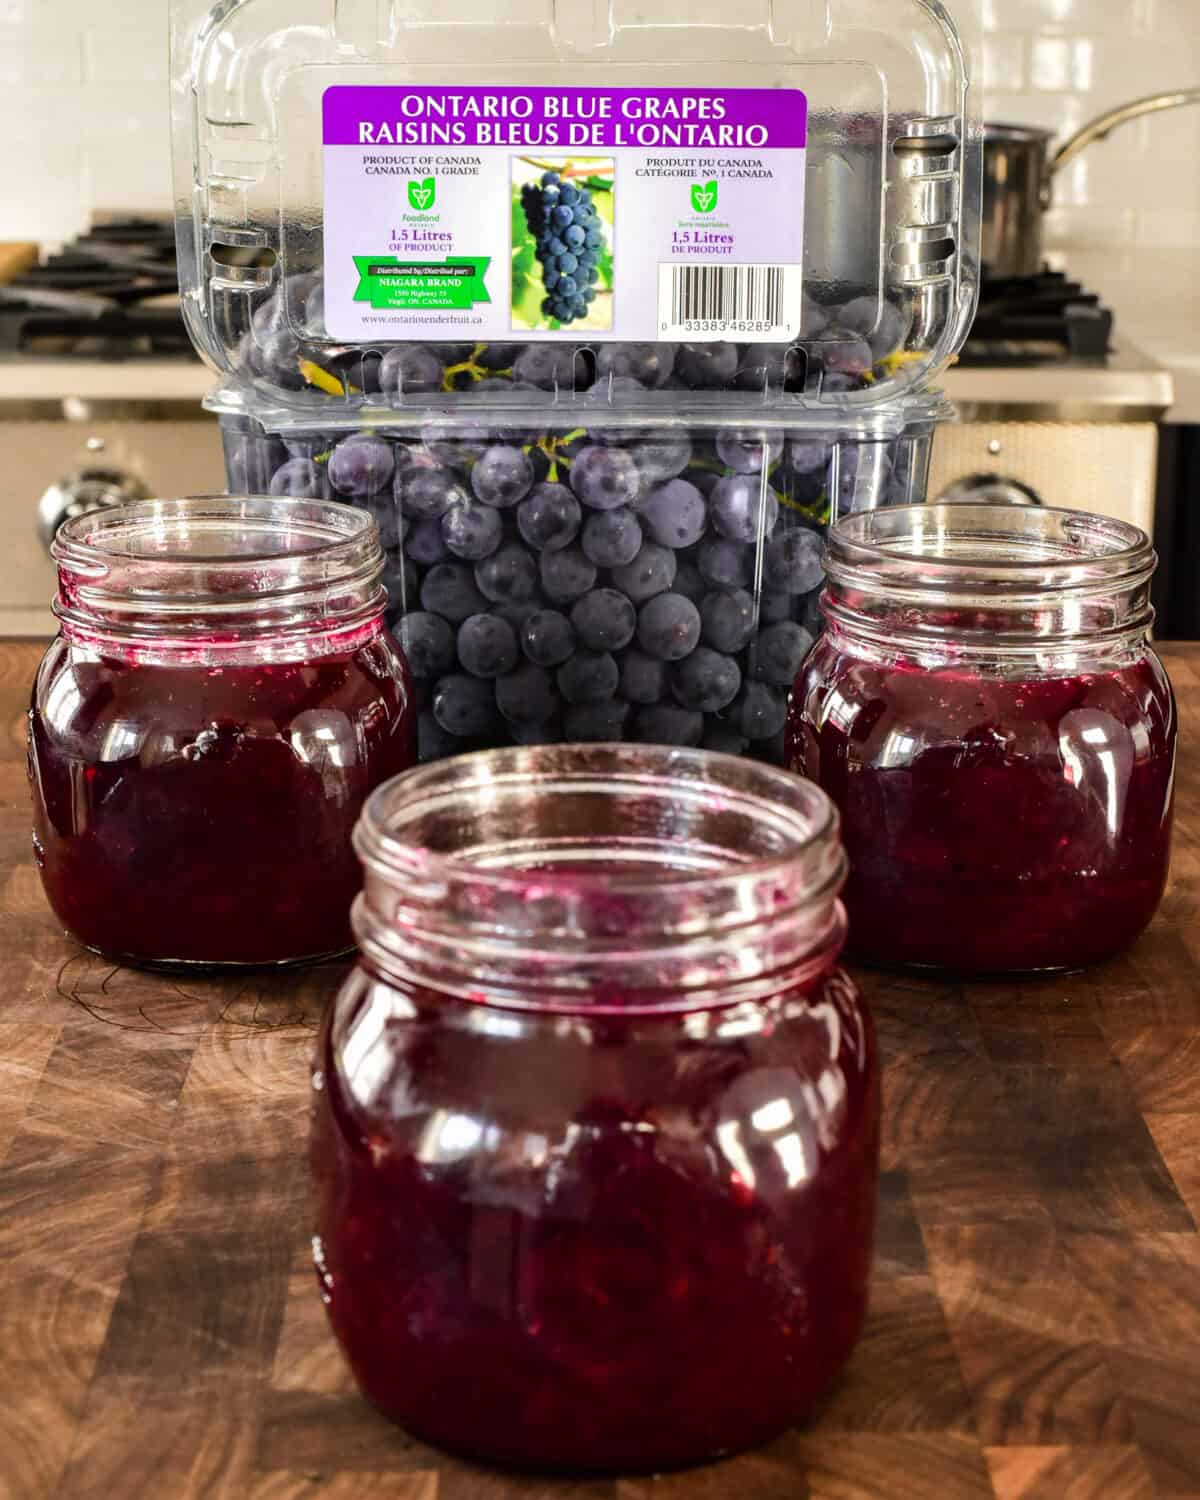 Three jars of jam in front of a container of Coronation grapes